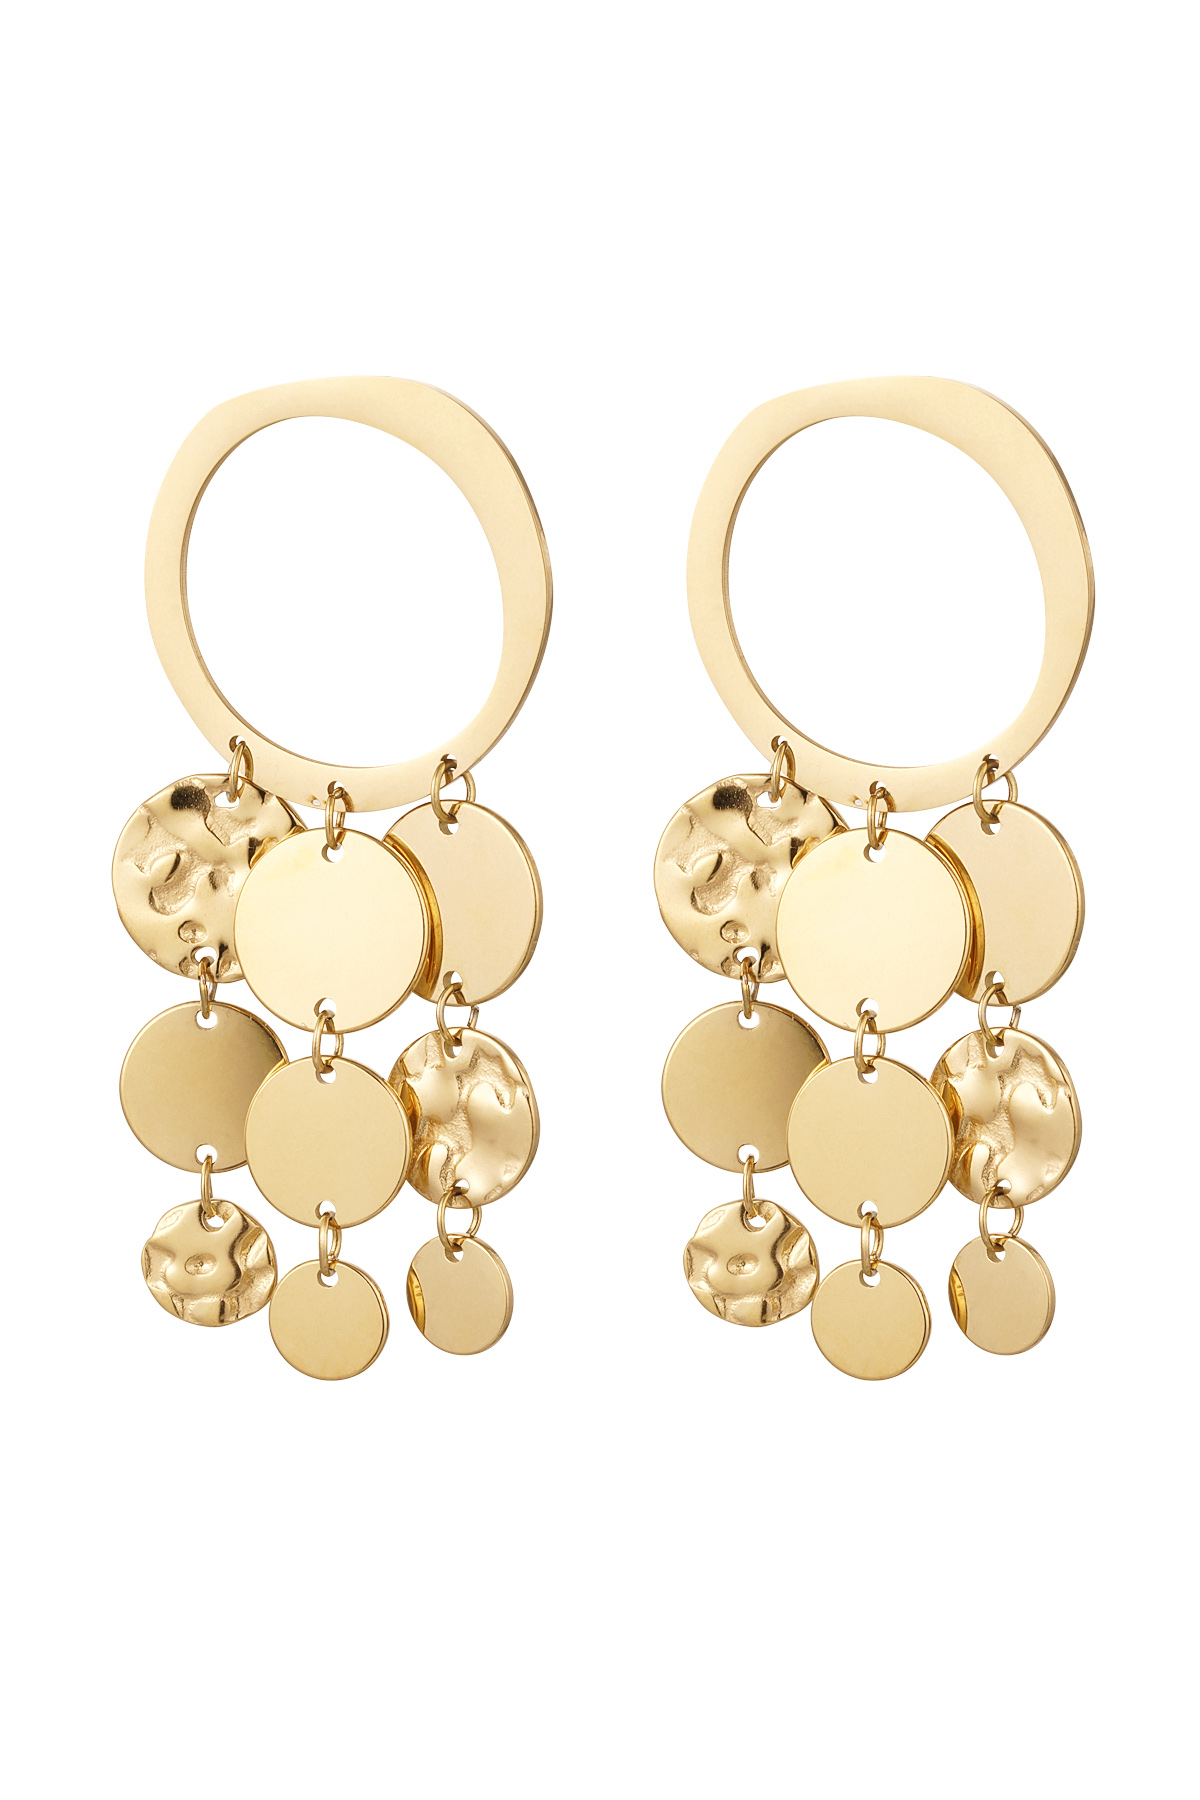 Earrings cheerful garlands - gold Stainless Steel 